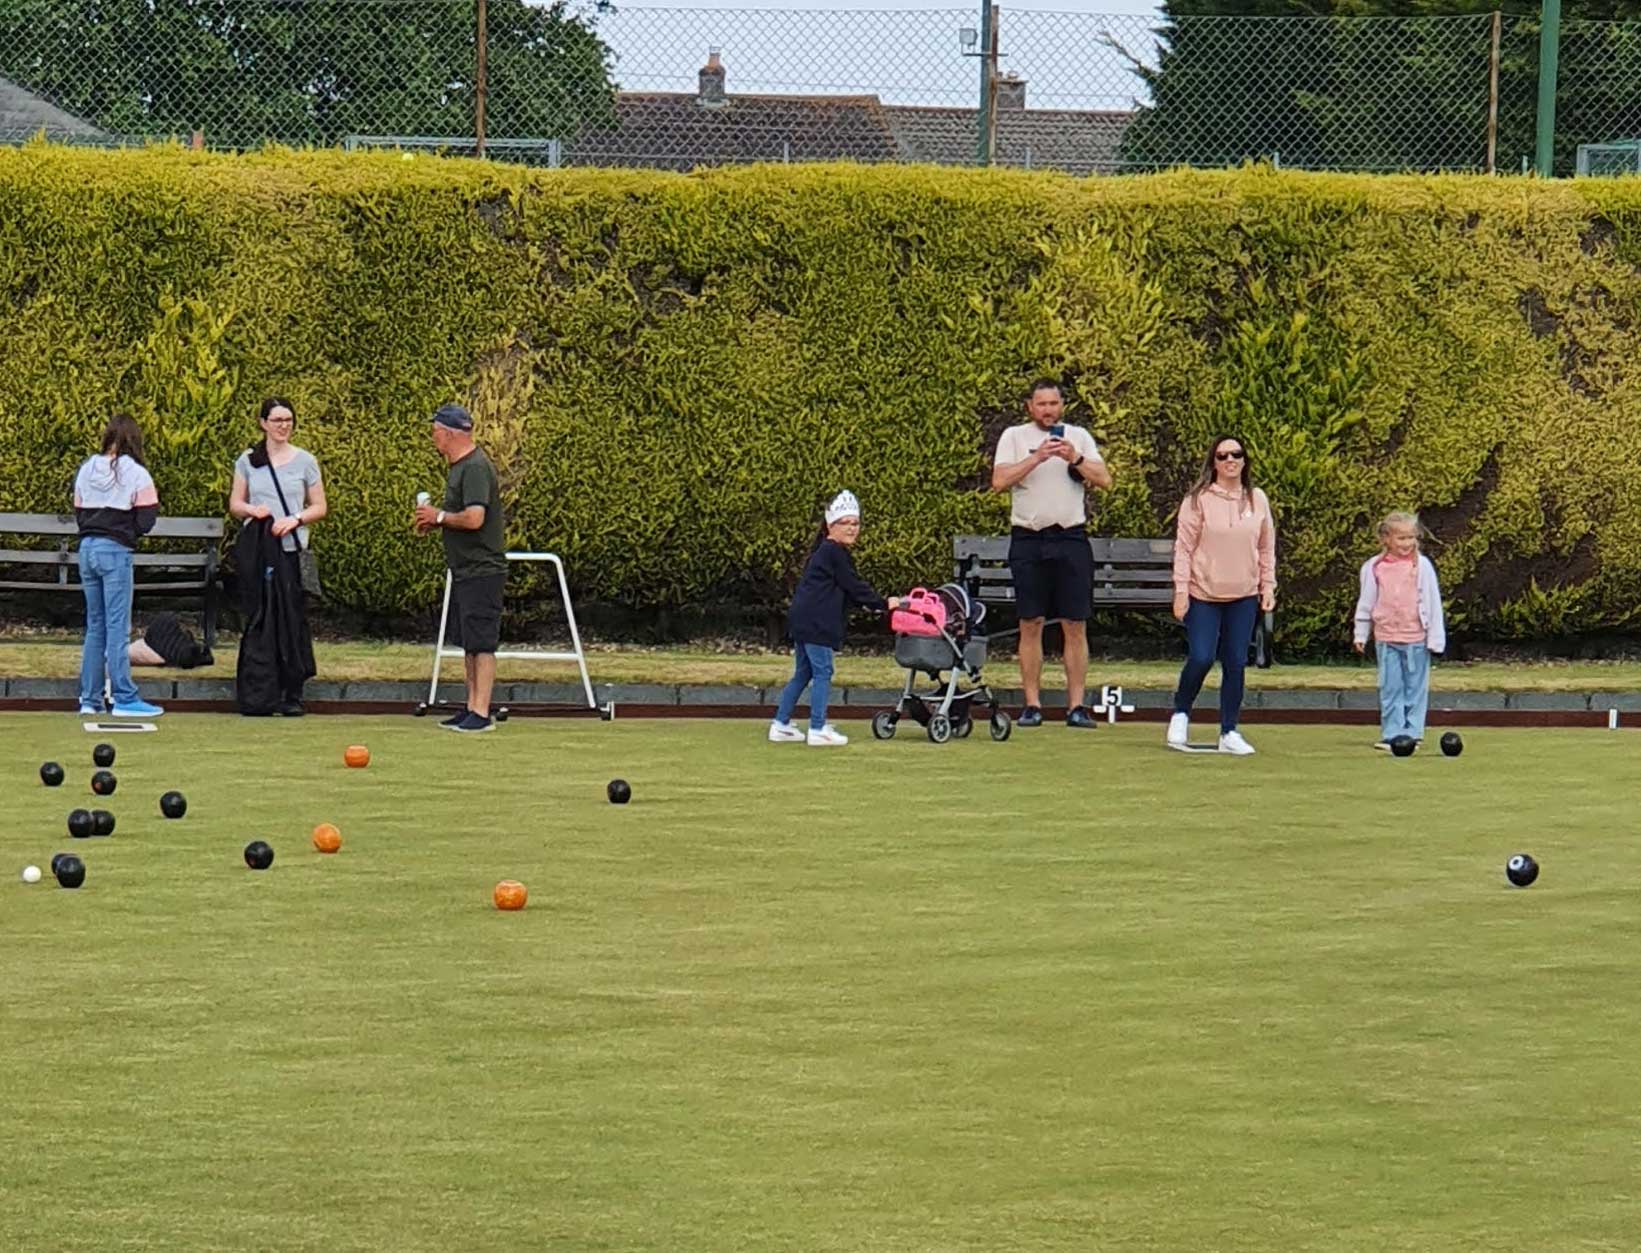 SOMERTON & DISTRICT BOWLS CLUB Jubilee Open Day 2022